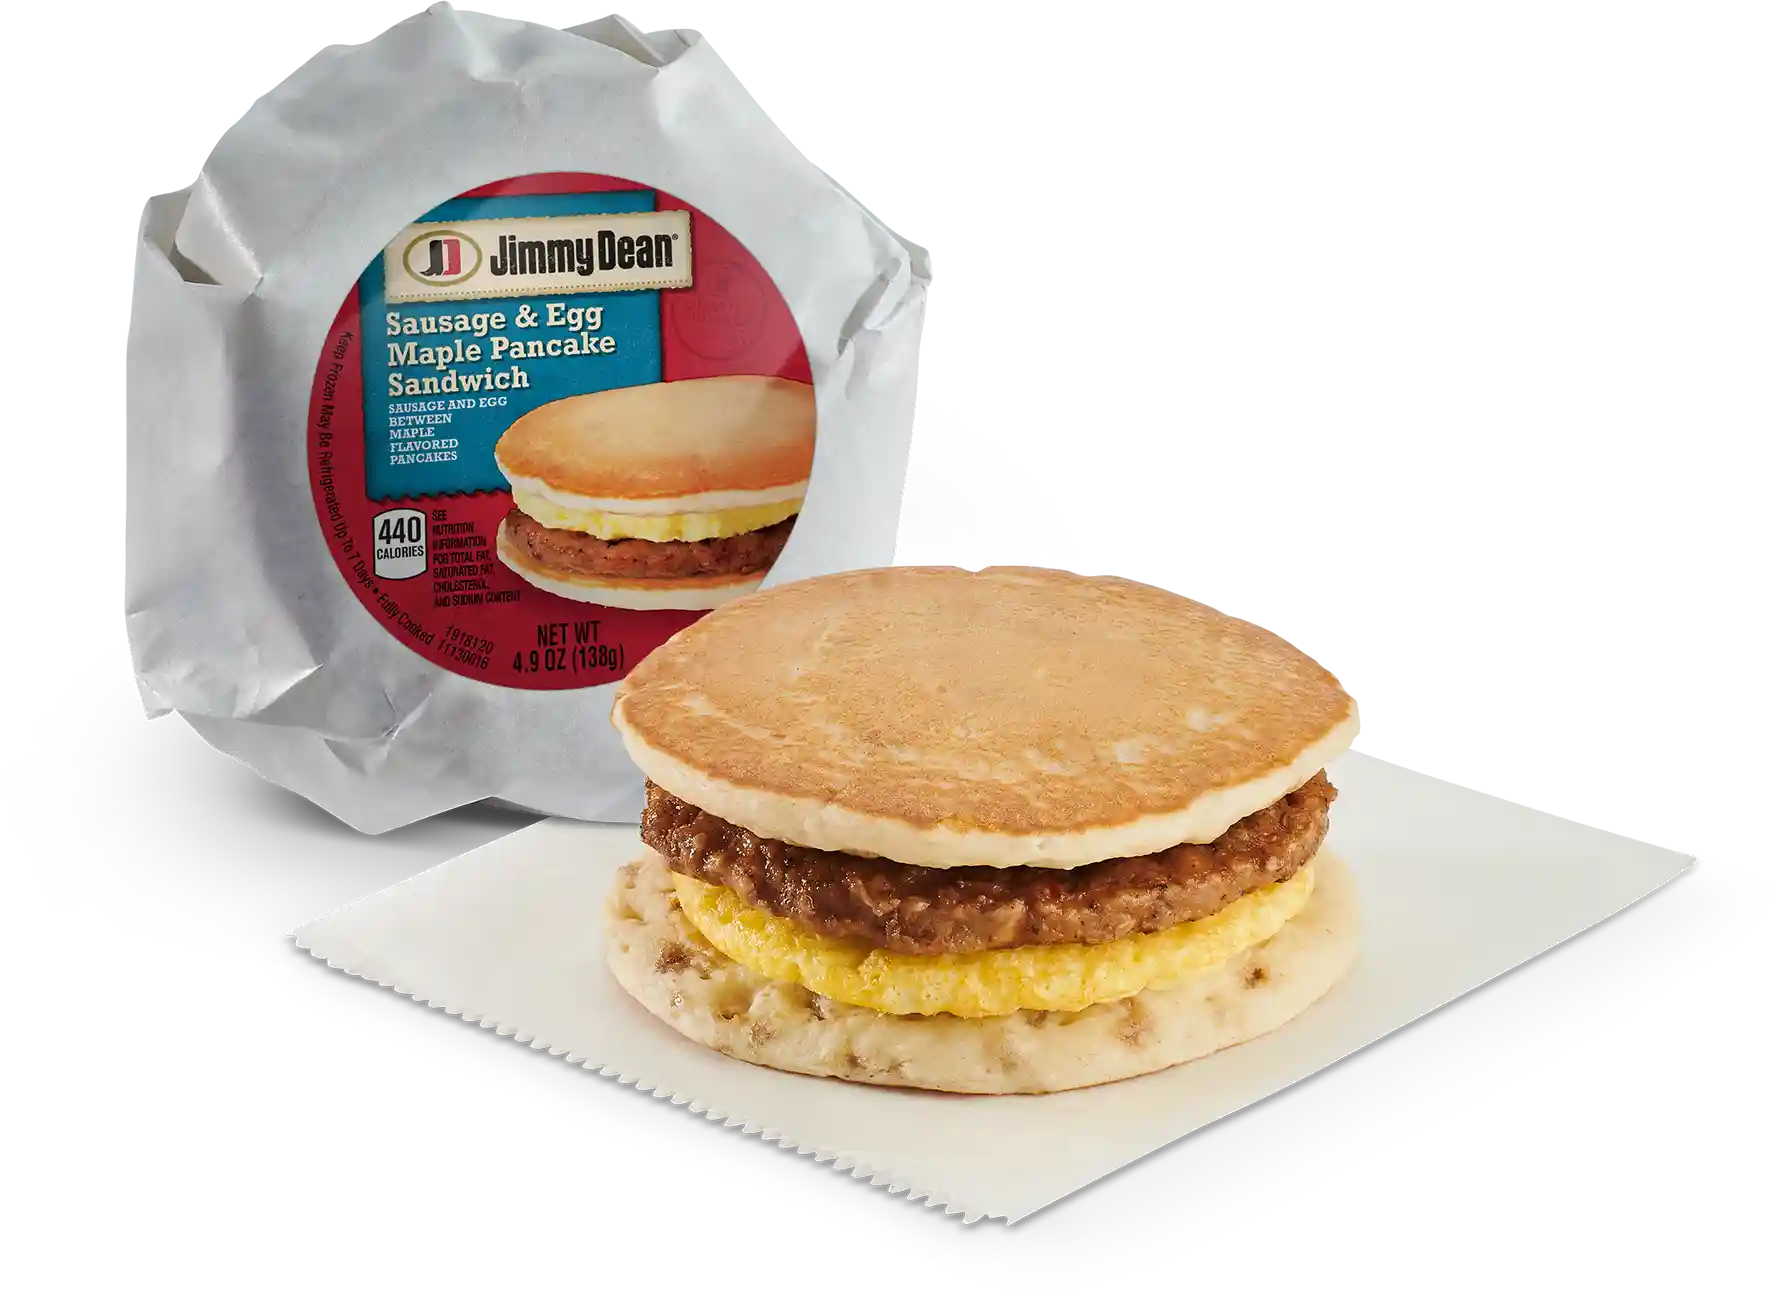 Jimmy Dean® Sausage & Egg Pancake Sandwich with Maple Syruphttps://images.salsify.com/image/upload/s--BYeErq0T--/q_25/mndxaxwl76i3rxdnbero.webp